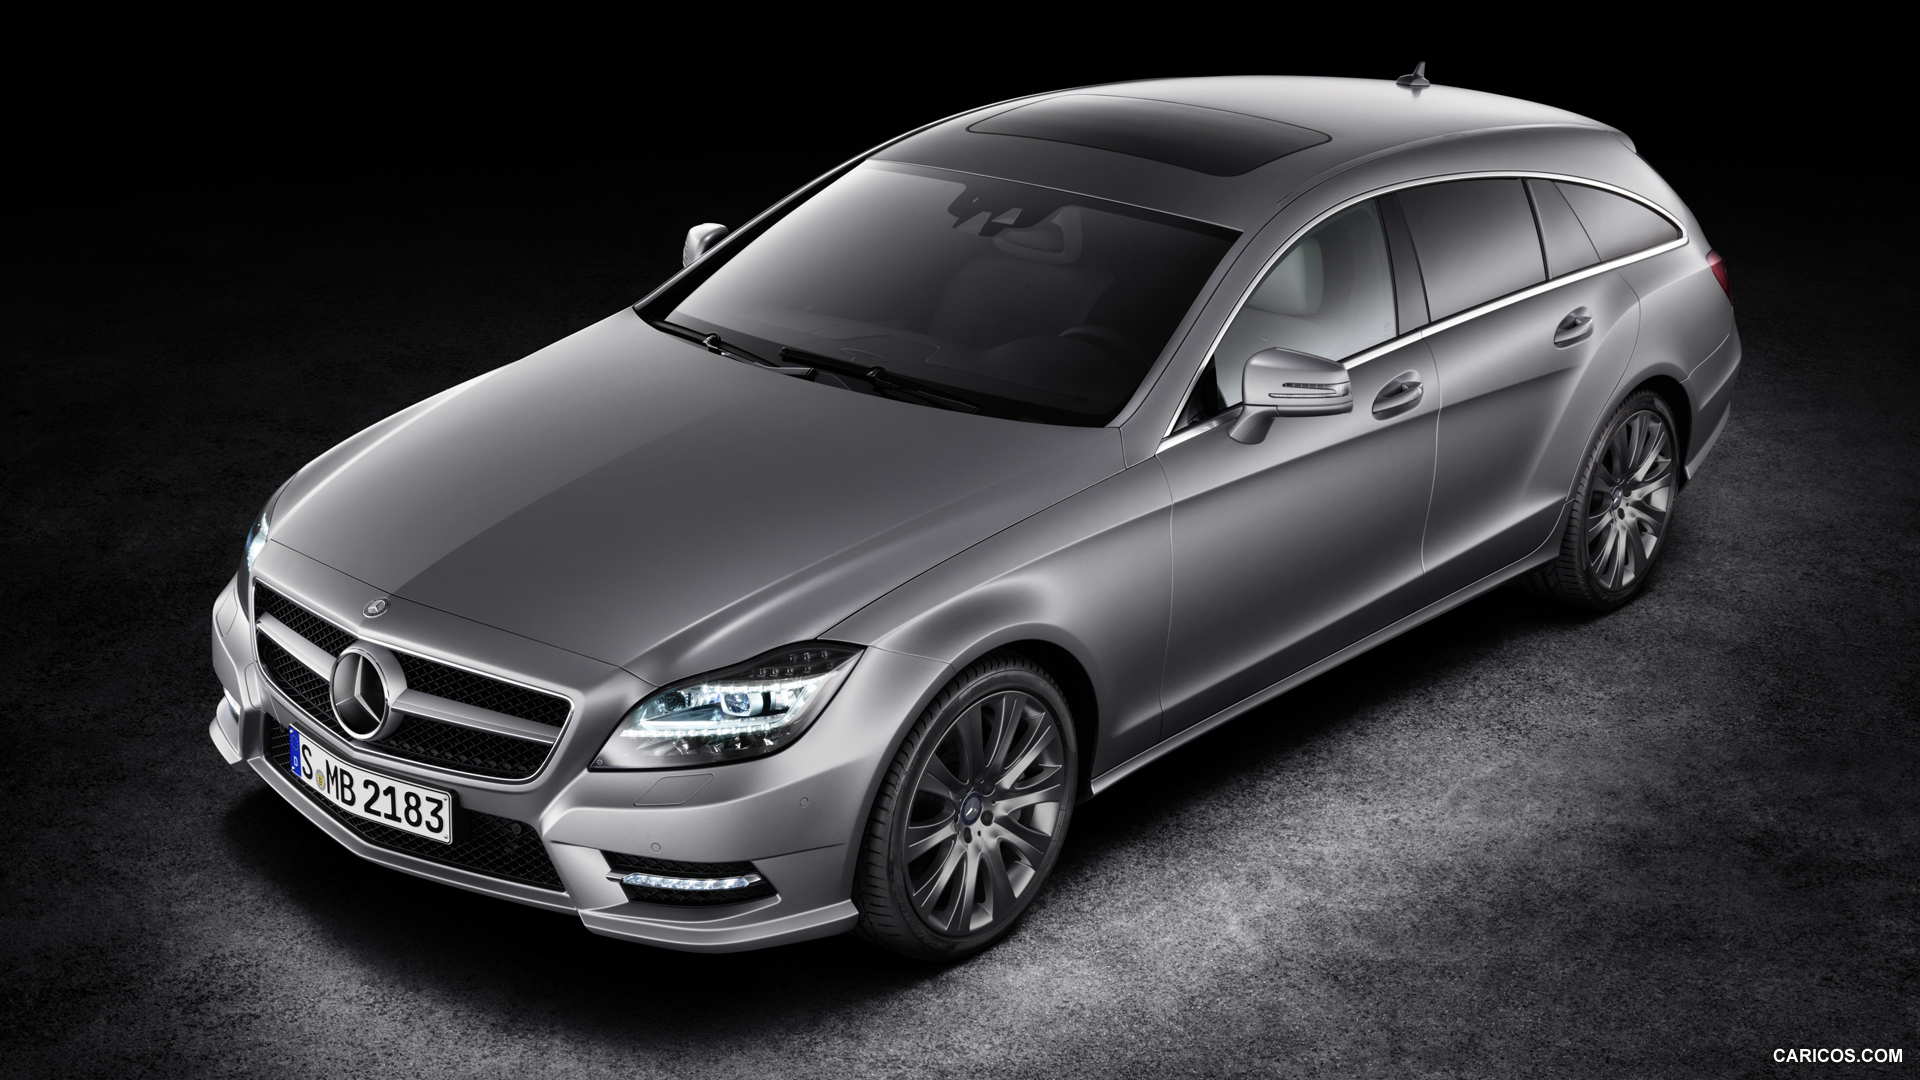 2013 Mercedes-Benz CLS 500 Shooting Brake - Front, #118 of 184